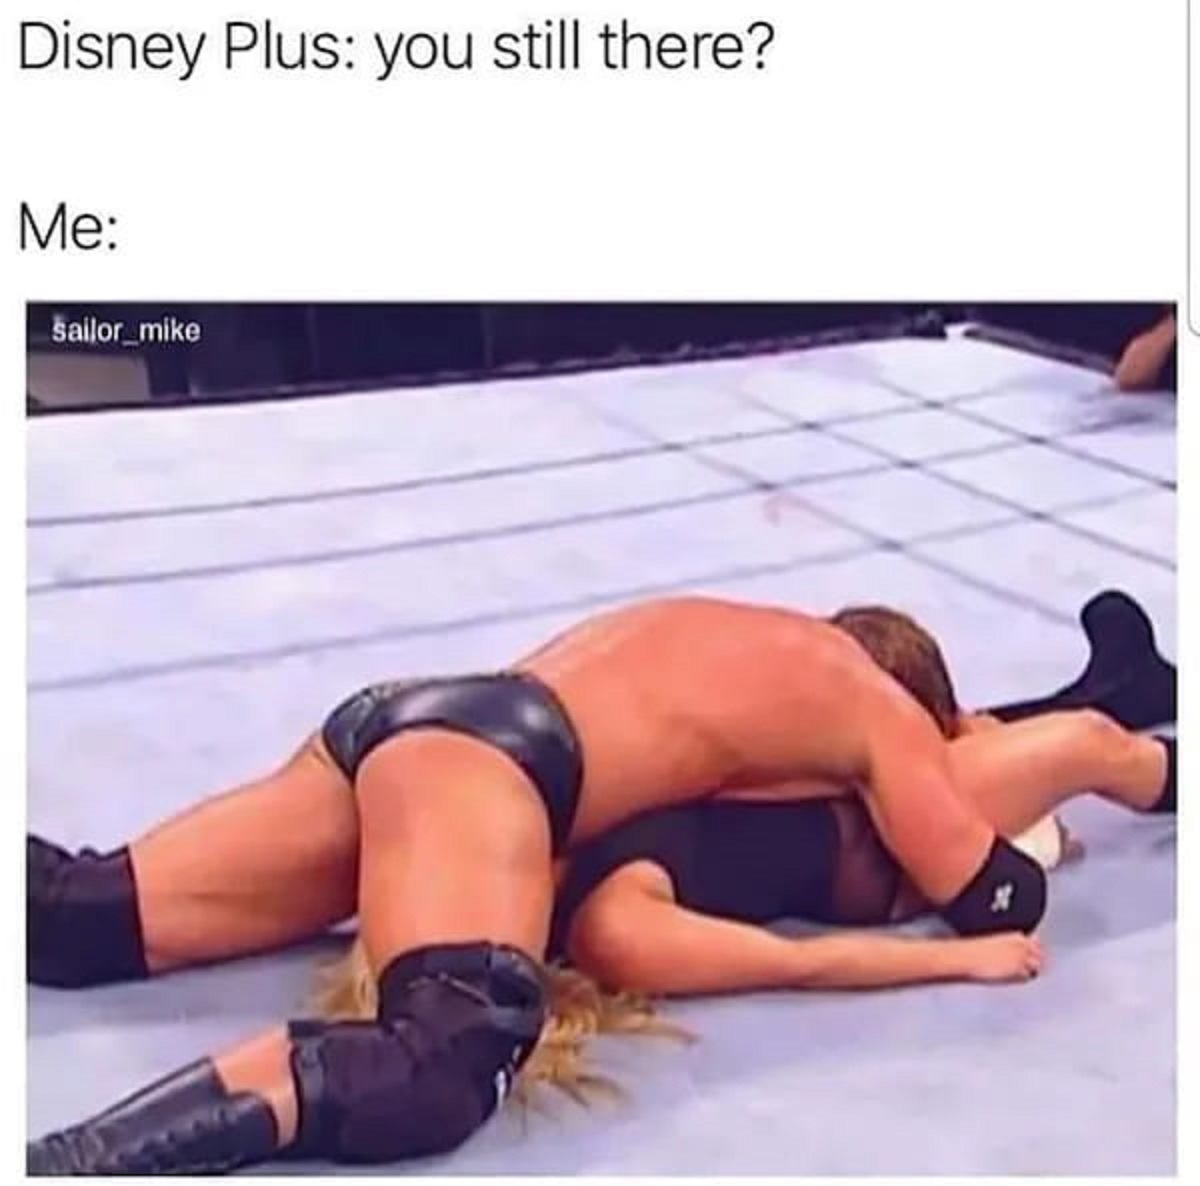 spicy memes -  thigh - Disney Plus you still there? Me sailor_mike